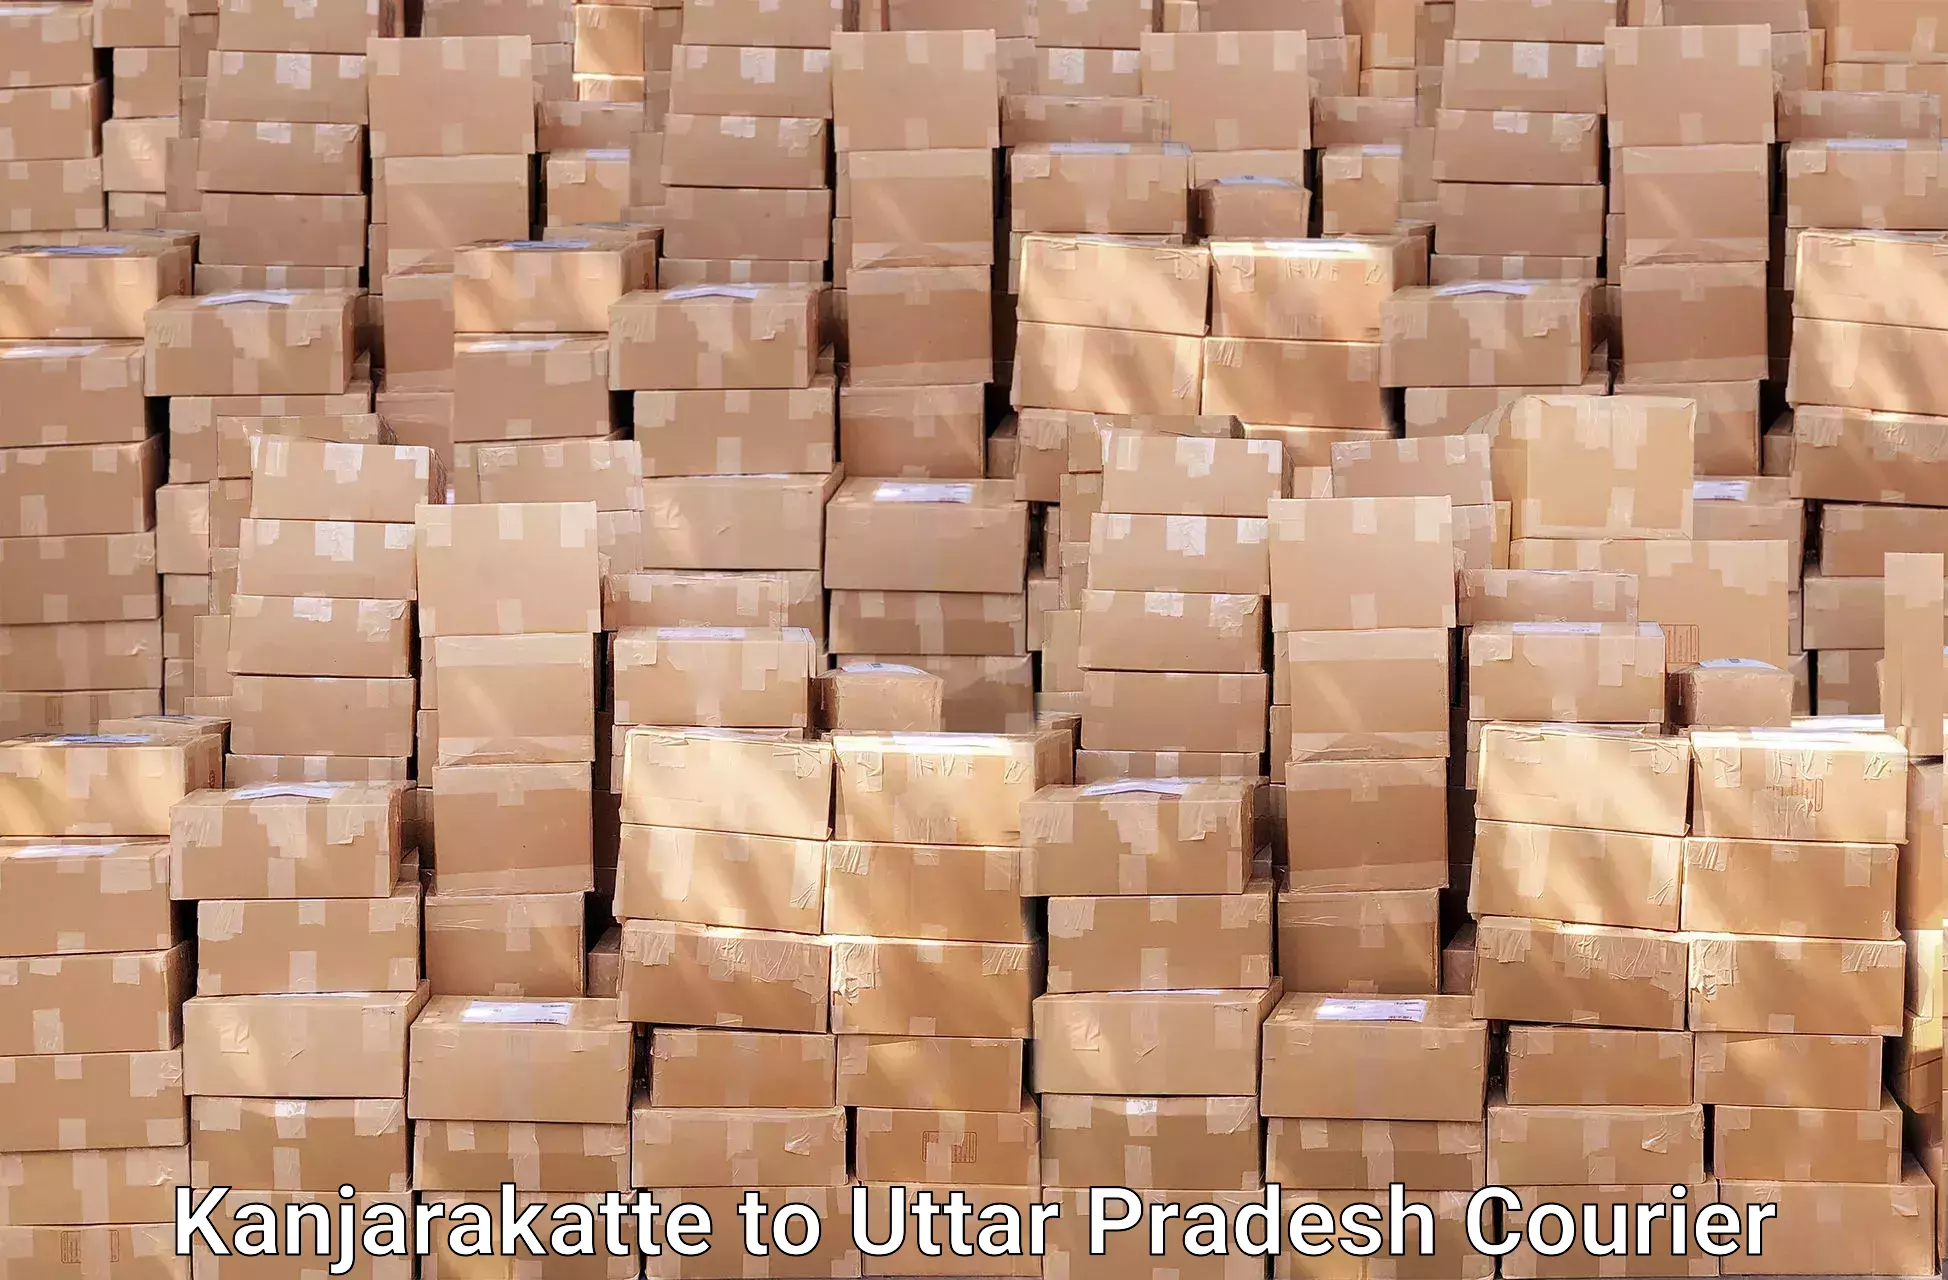 Quality relocation assistance in Kanjarakatte to Pilibhit